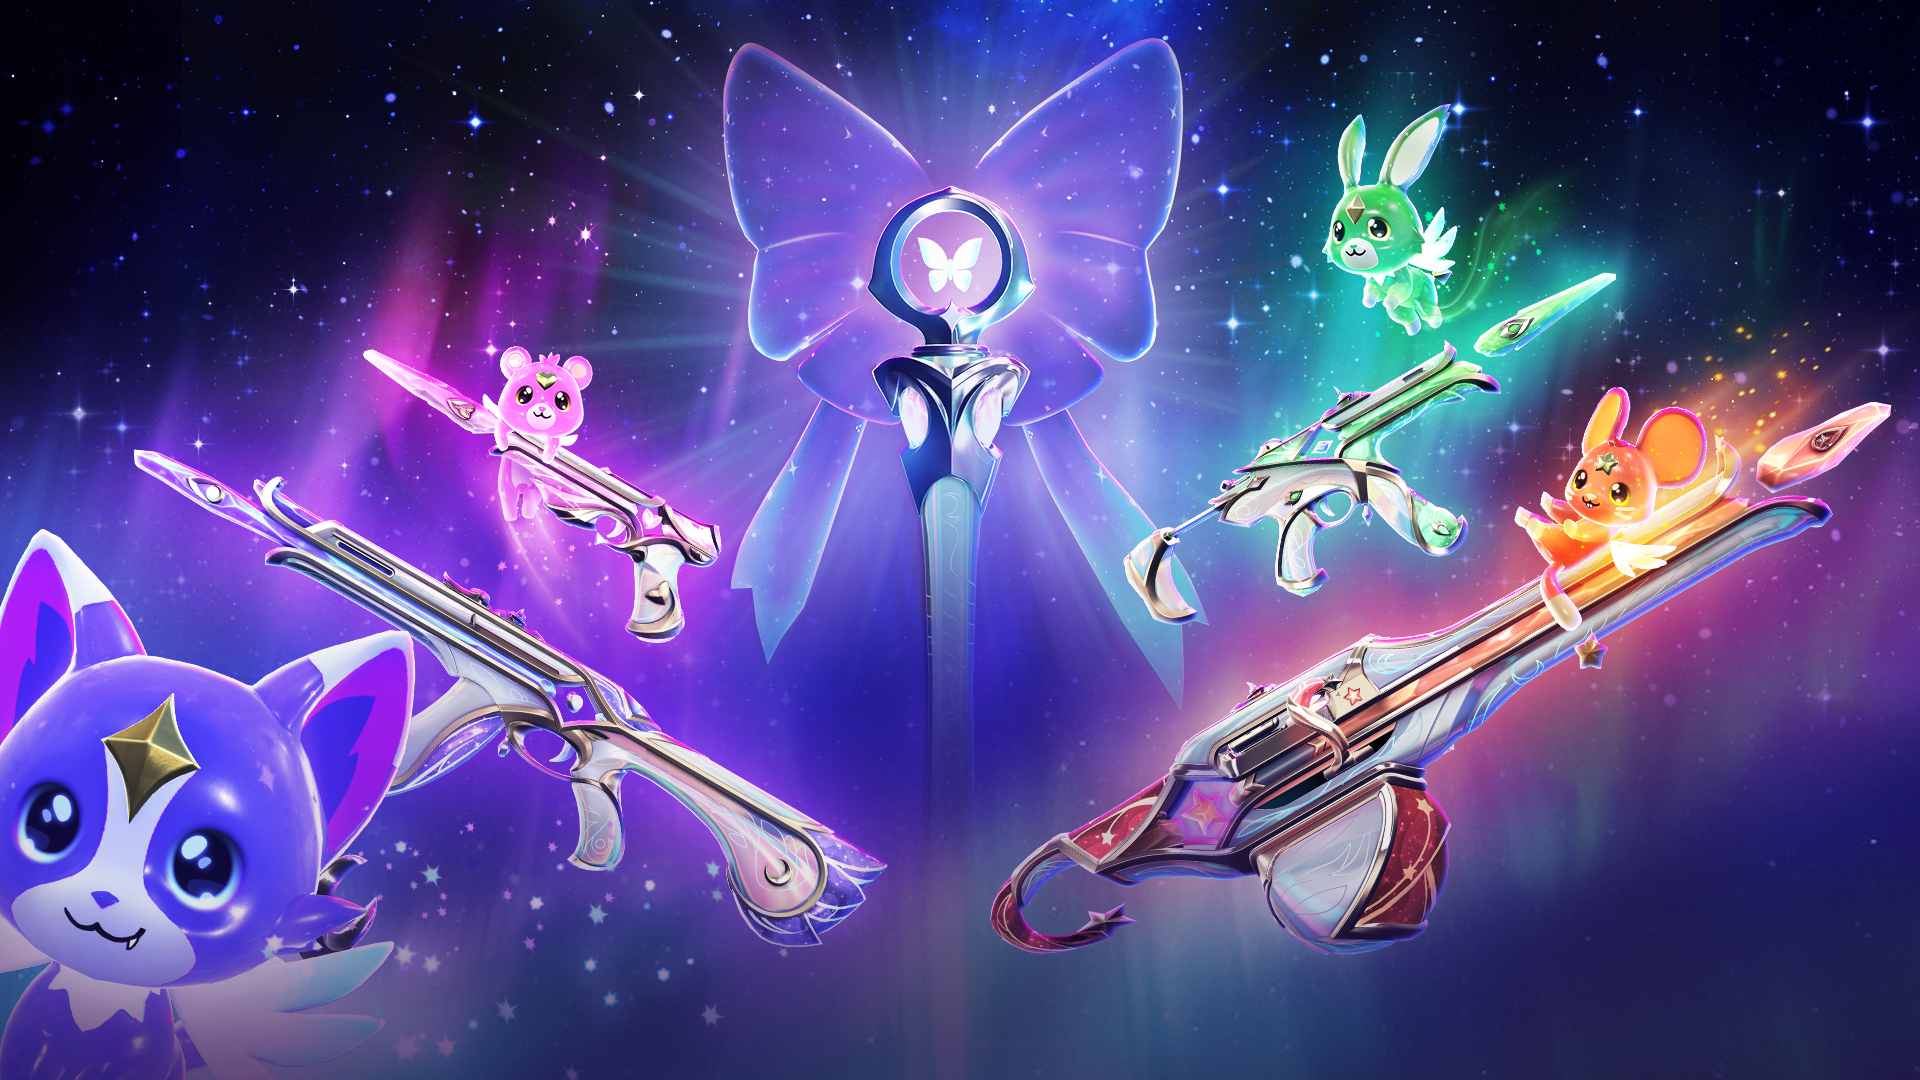 Enchant Your Arsenal: Valorant Introduces the Evori Dreamwings Skinline